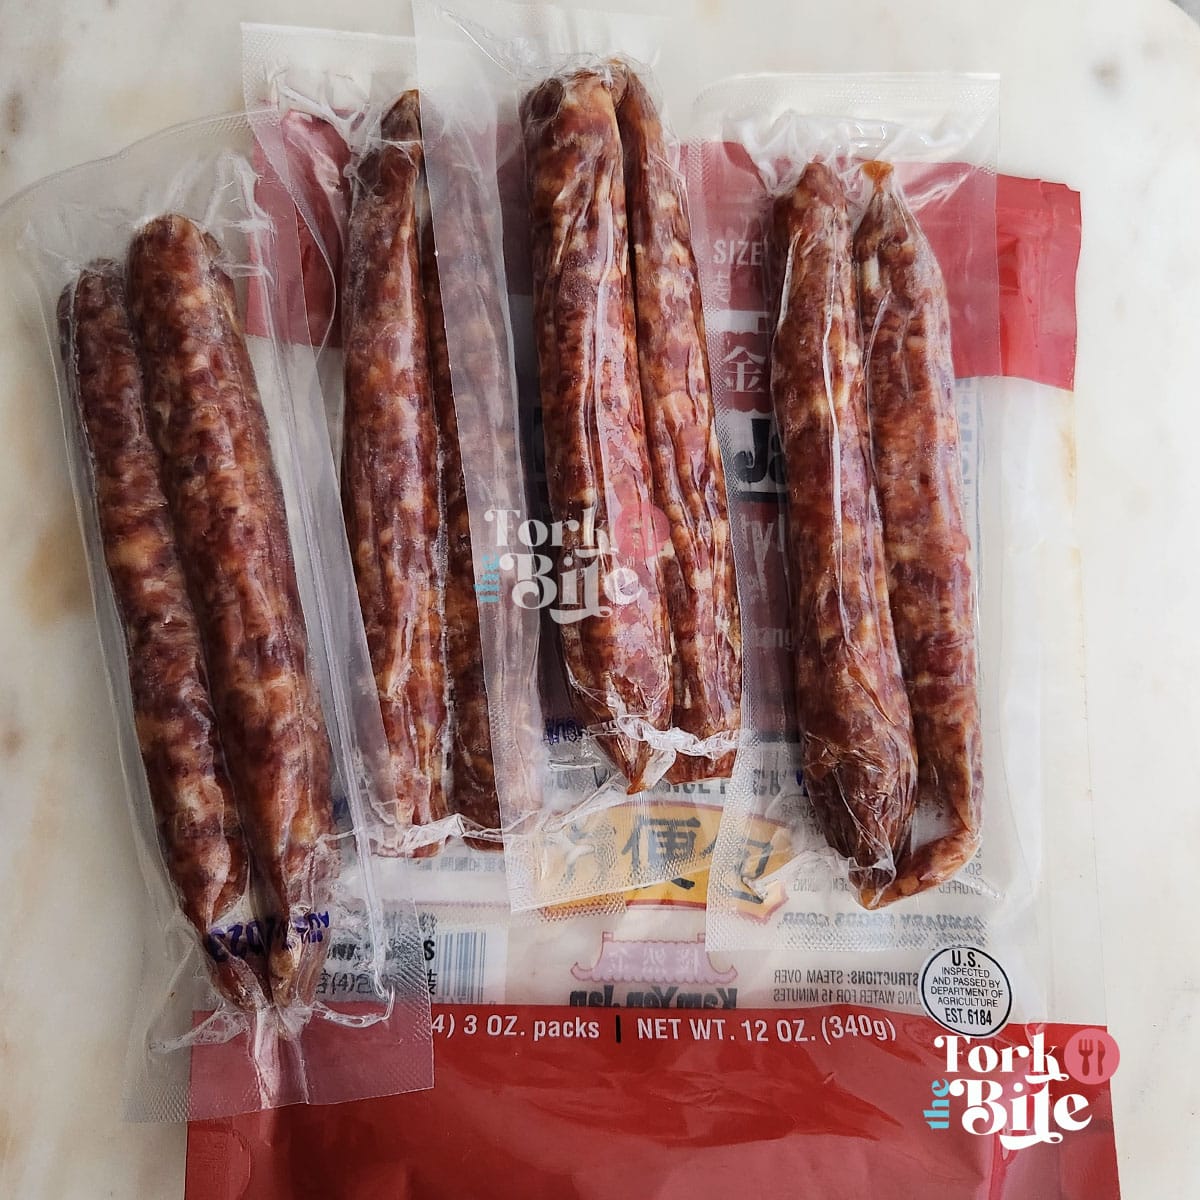 Lap cheong, also known as Chinese sausage, is a type of cured sausage commonly used in Chinese cuisine. It is made from fatty pork meat, typically from the shoulder or belly, which is then mixed with salt, sugar, soy sauce, rice wine, and various spices such as cinnamon, star anise, and cloves.